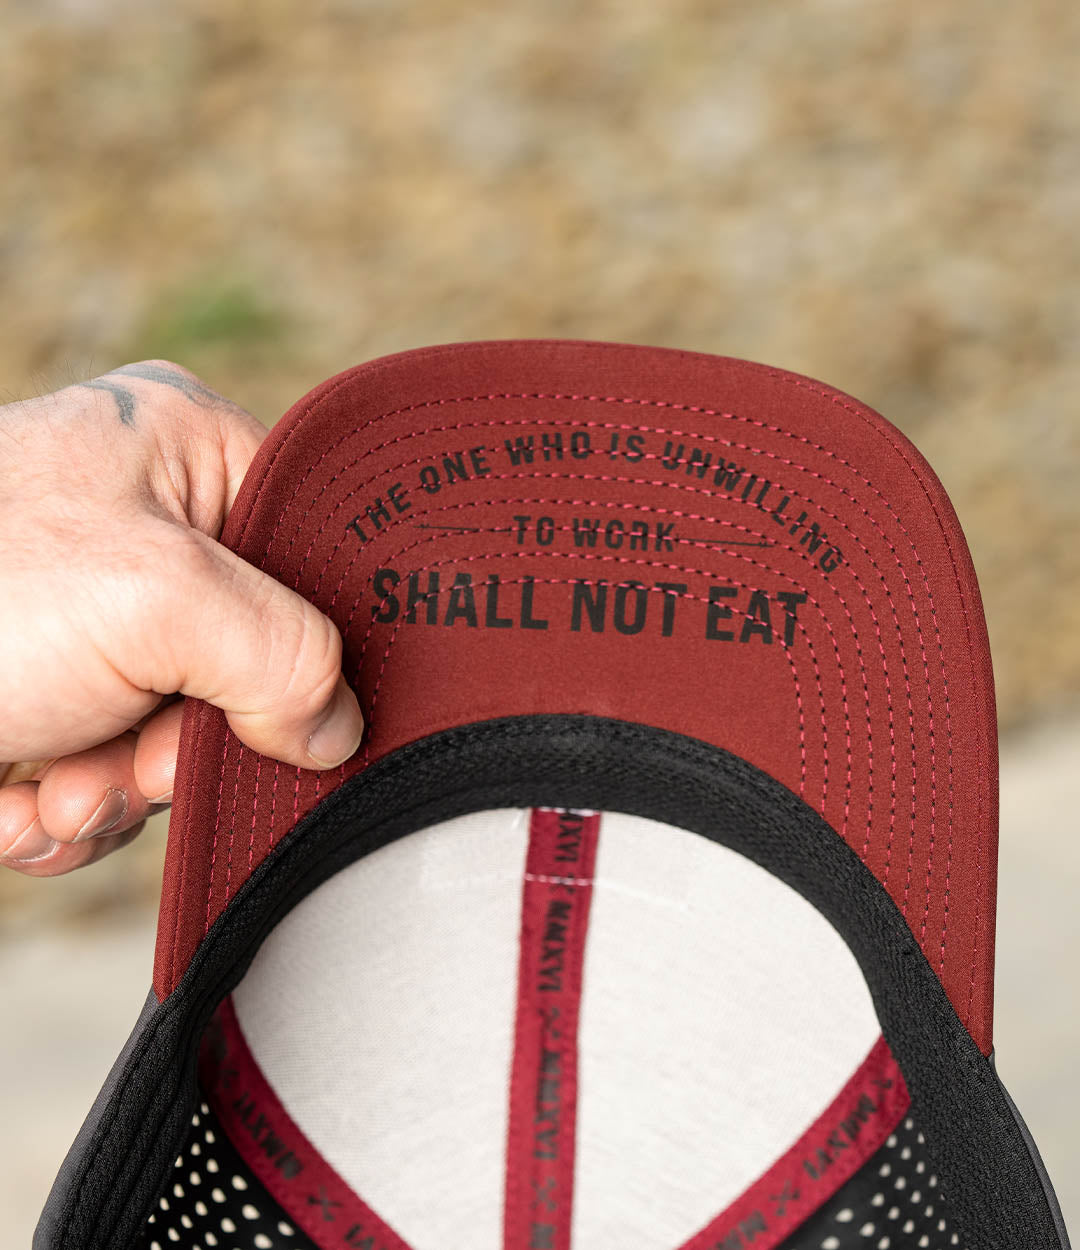 Shall Not Eat 6 Panel Performance Hat